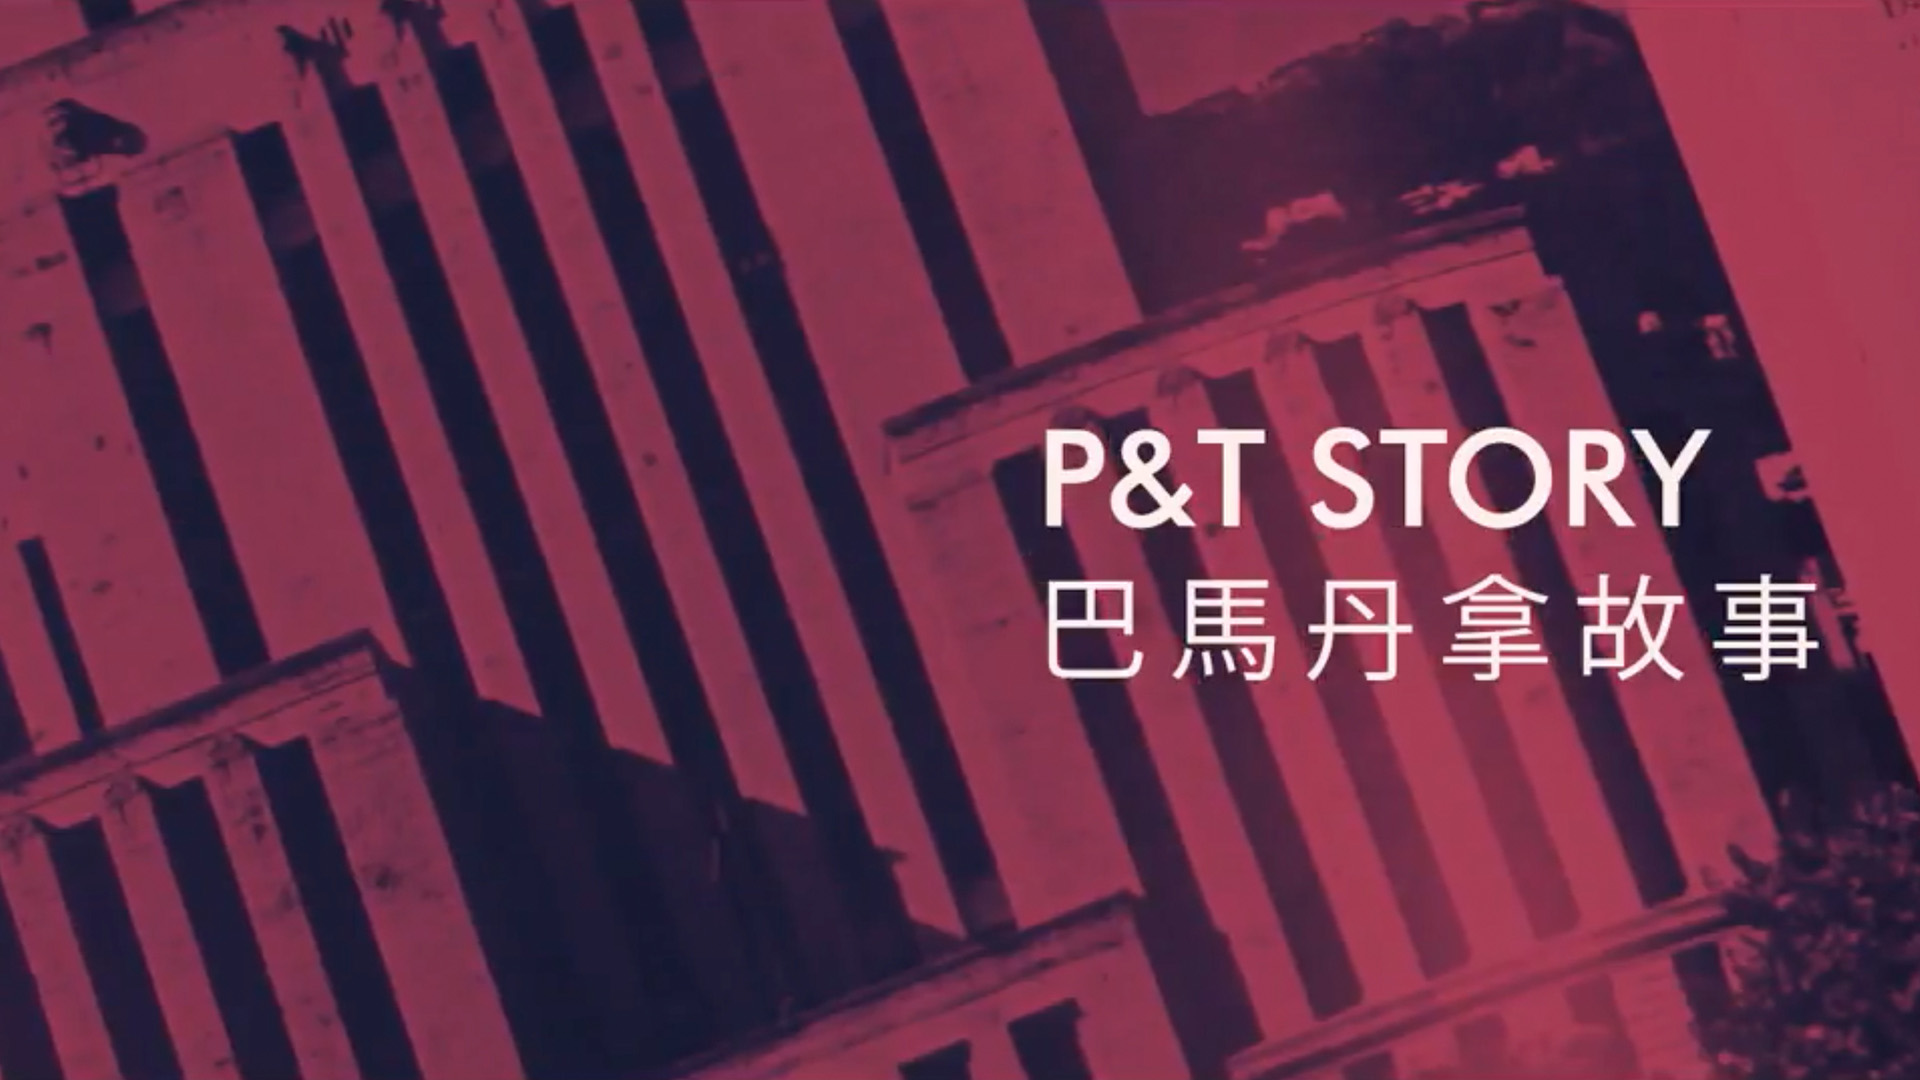 The production of the corporate video for P&T by D2 Studio Marketing Agency and Branding Agency Hong Kong and Guangzhou China who provide production of corporate videos 5